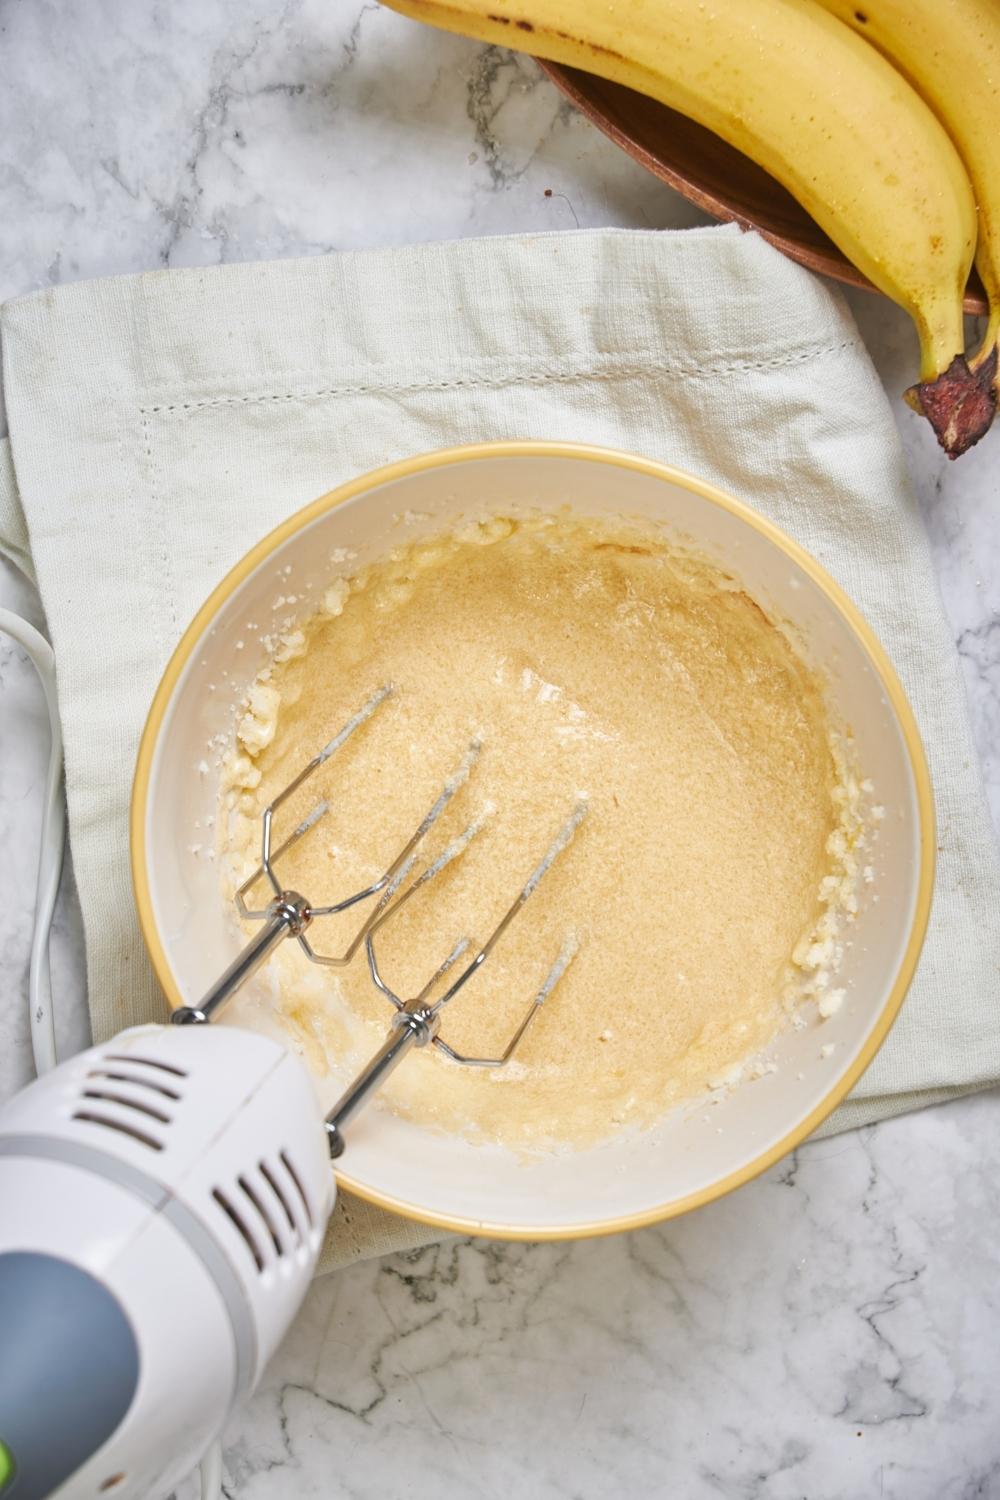 An electric mixer mixing cake batter in a bowl.